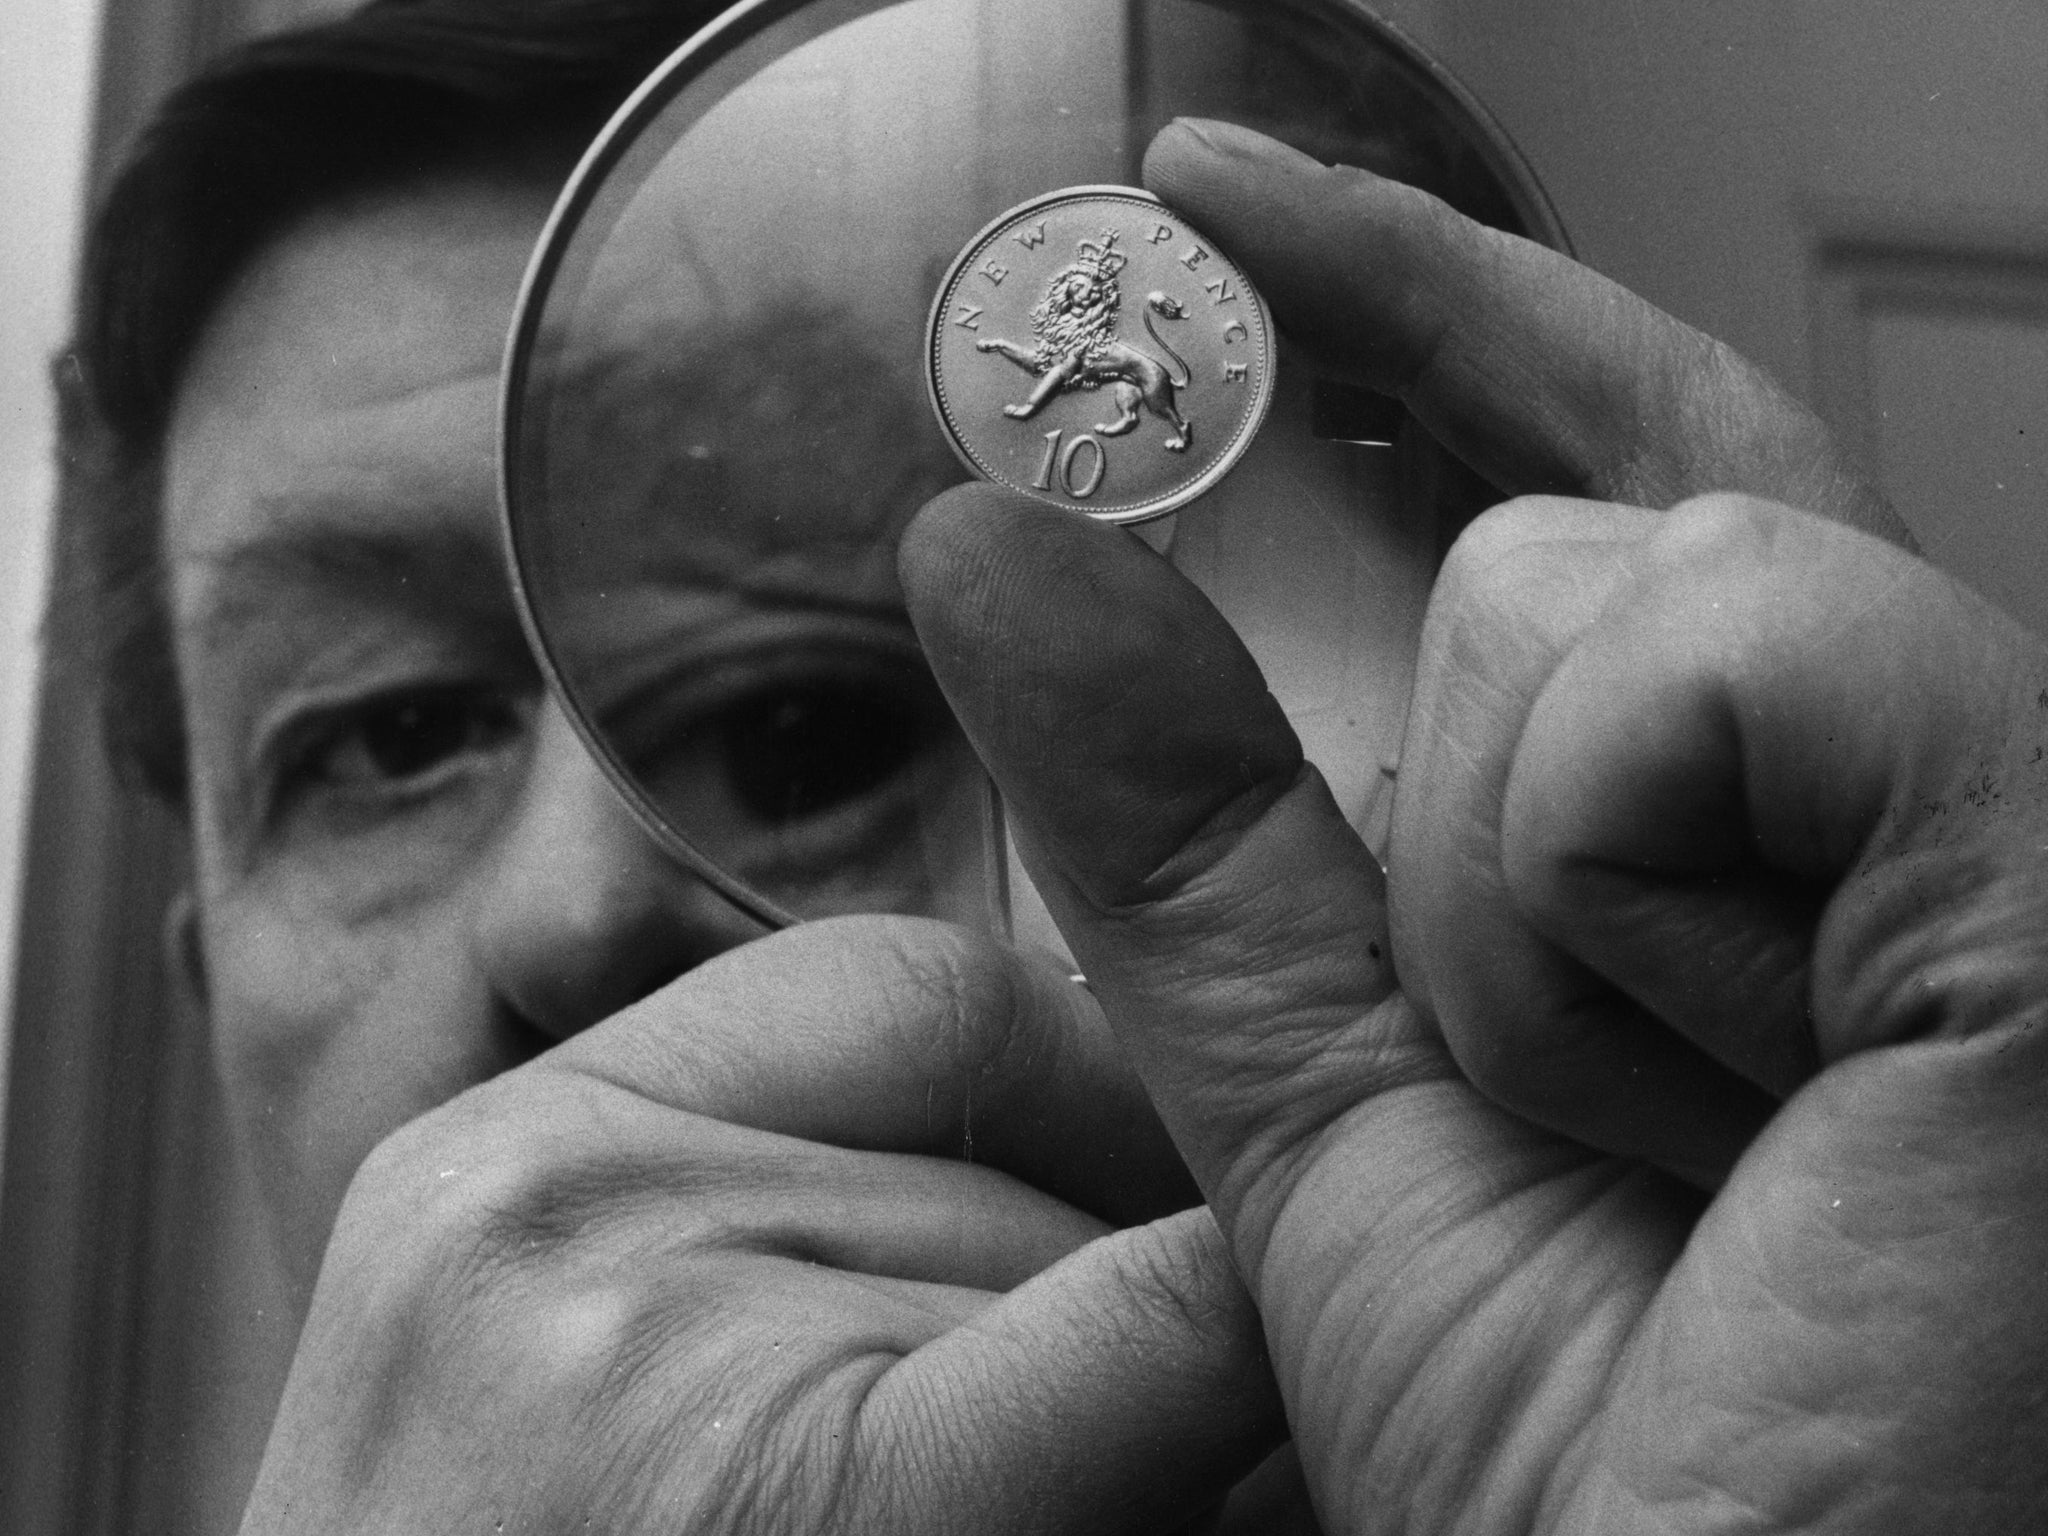 Christopher Ironside, designer of the reverse side of the decimal 10 pence piece, examines the coin through a magnifying glass at the Royal Mint in 1968